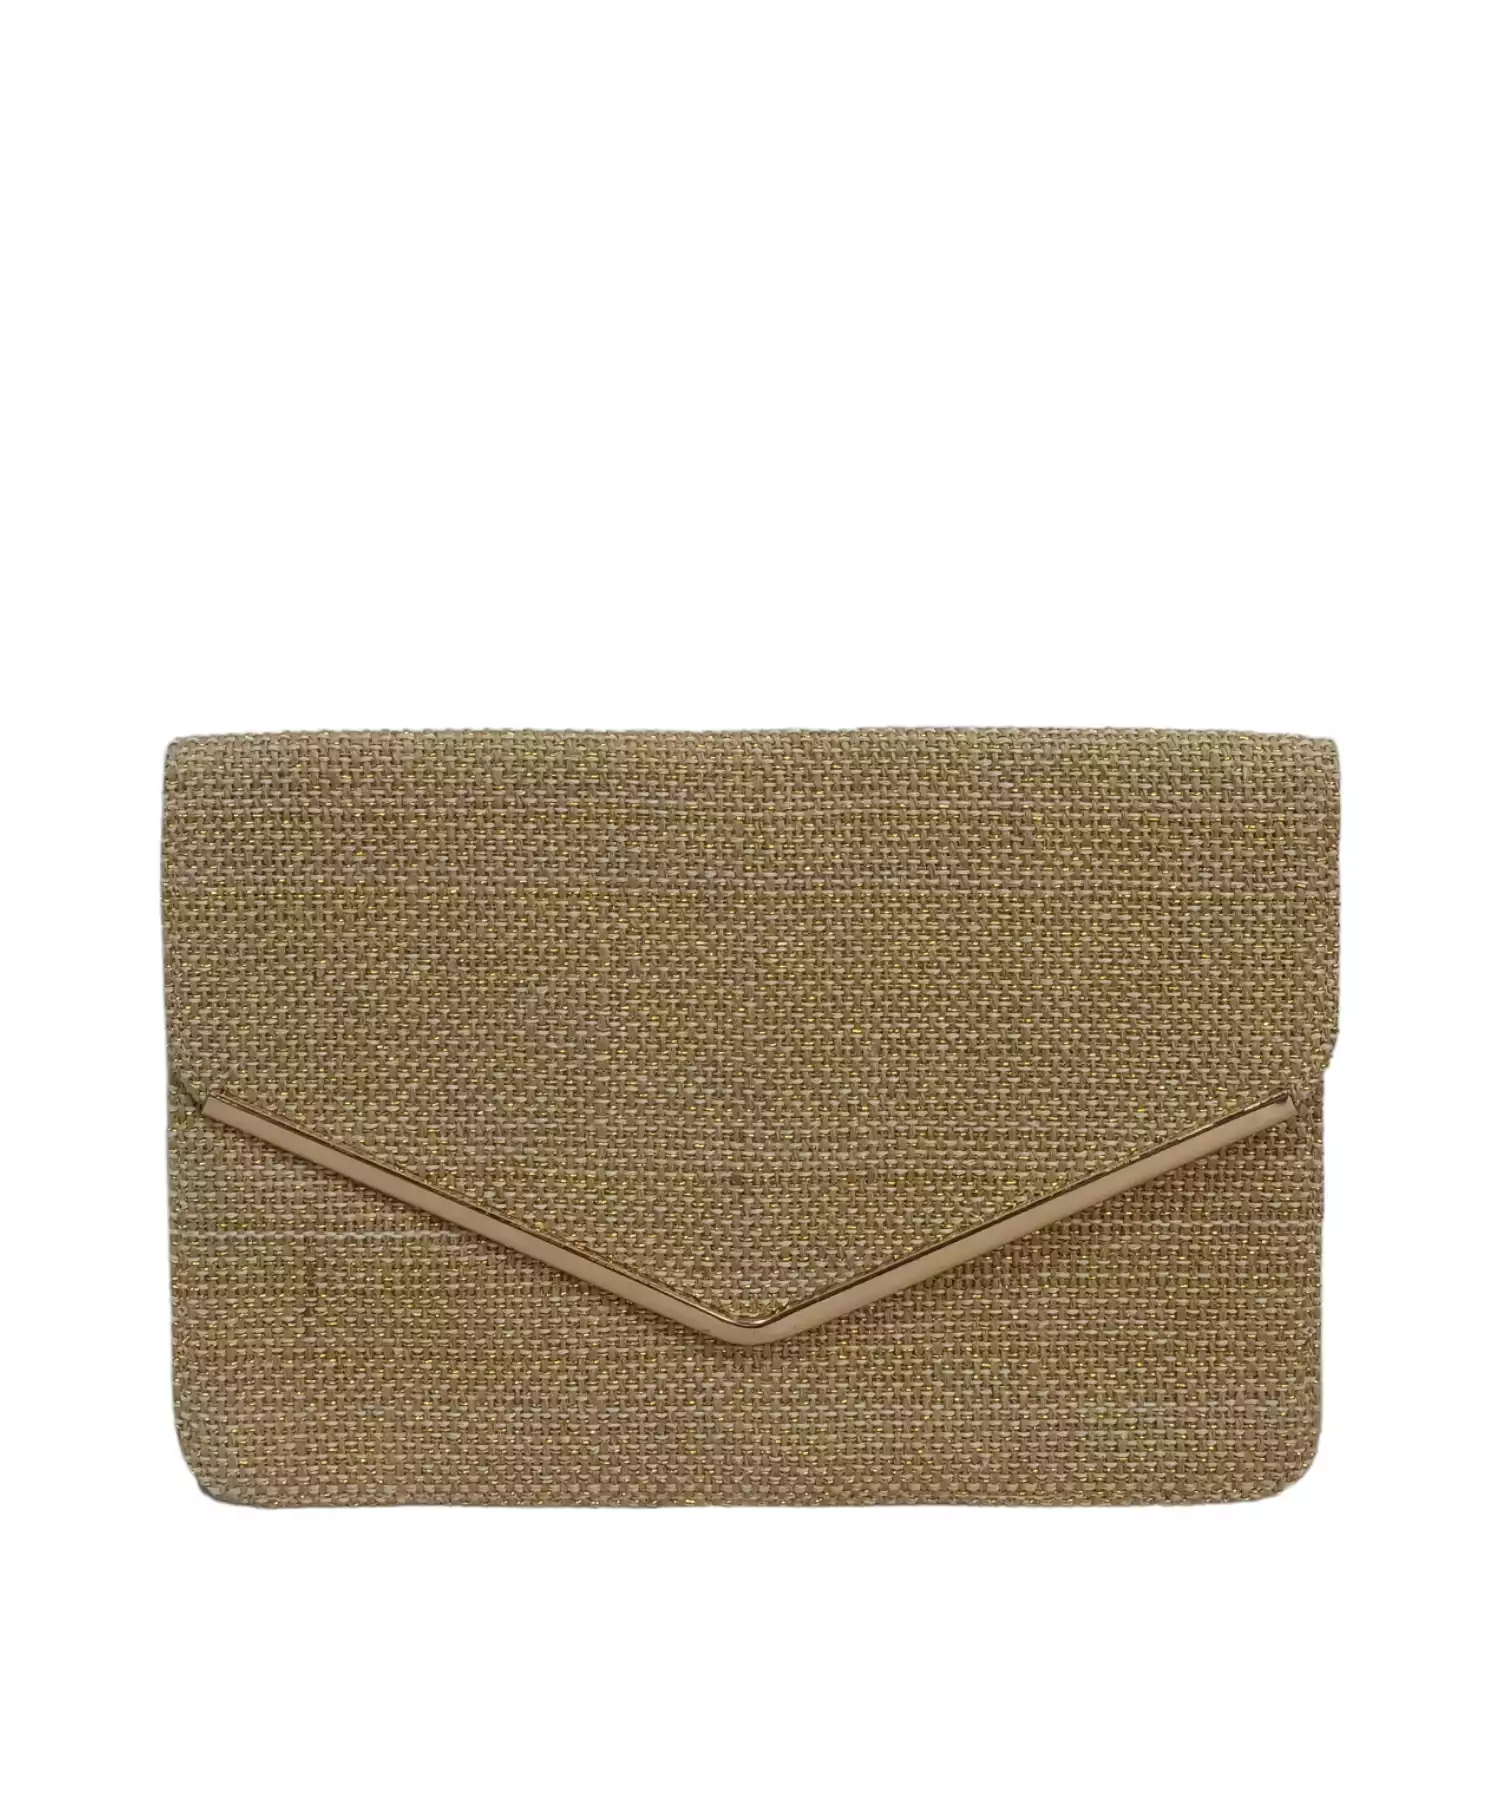 Clutch Bag by New Look